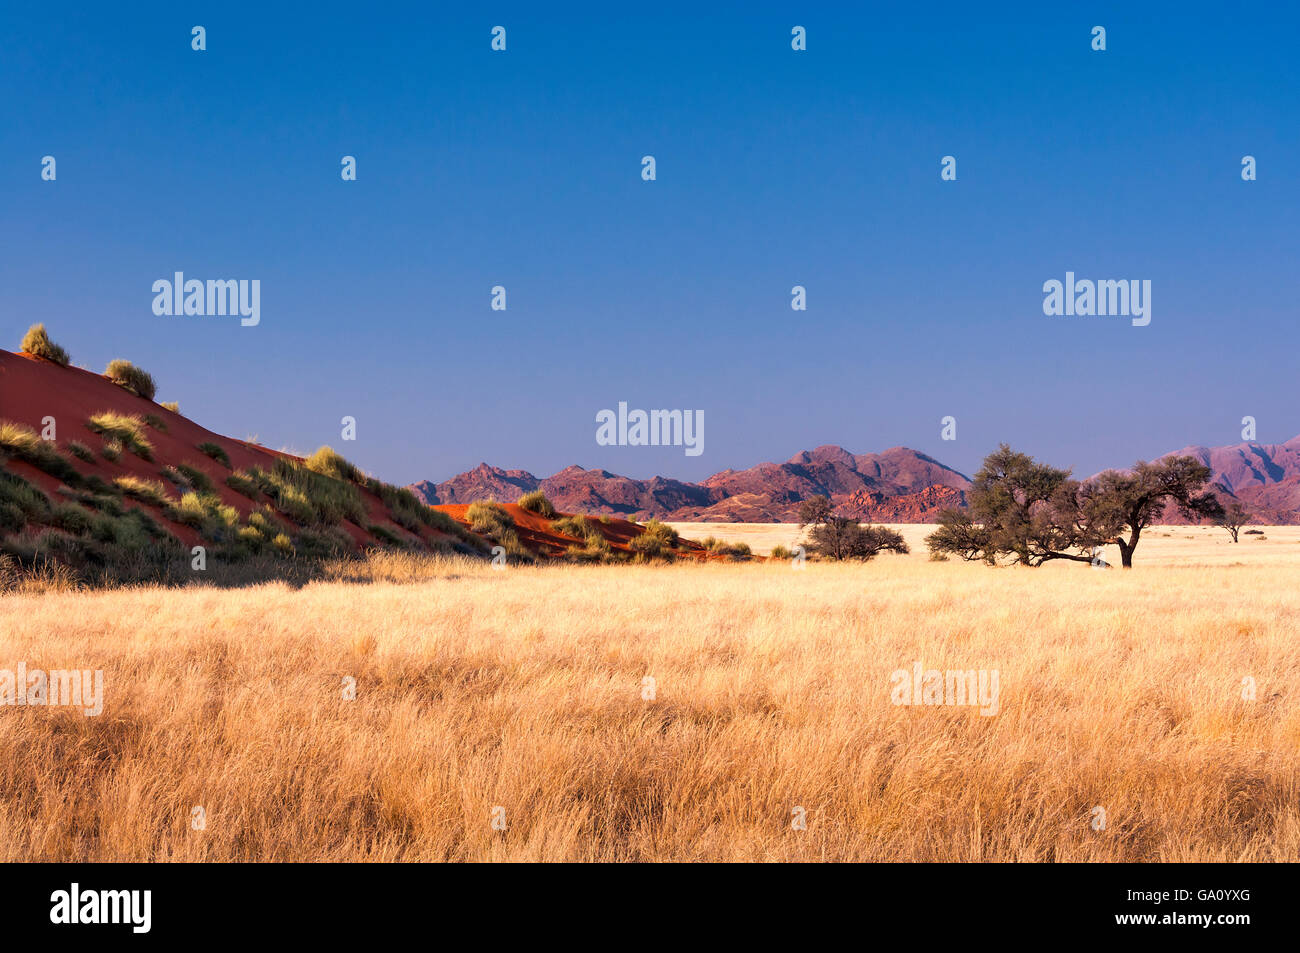 View of the Savannah in Namibia, Africa Stock Photo